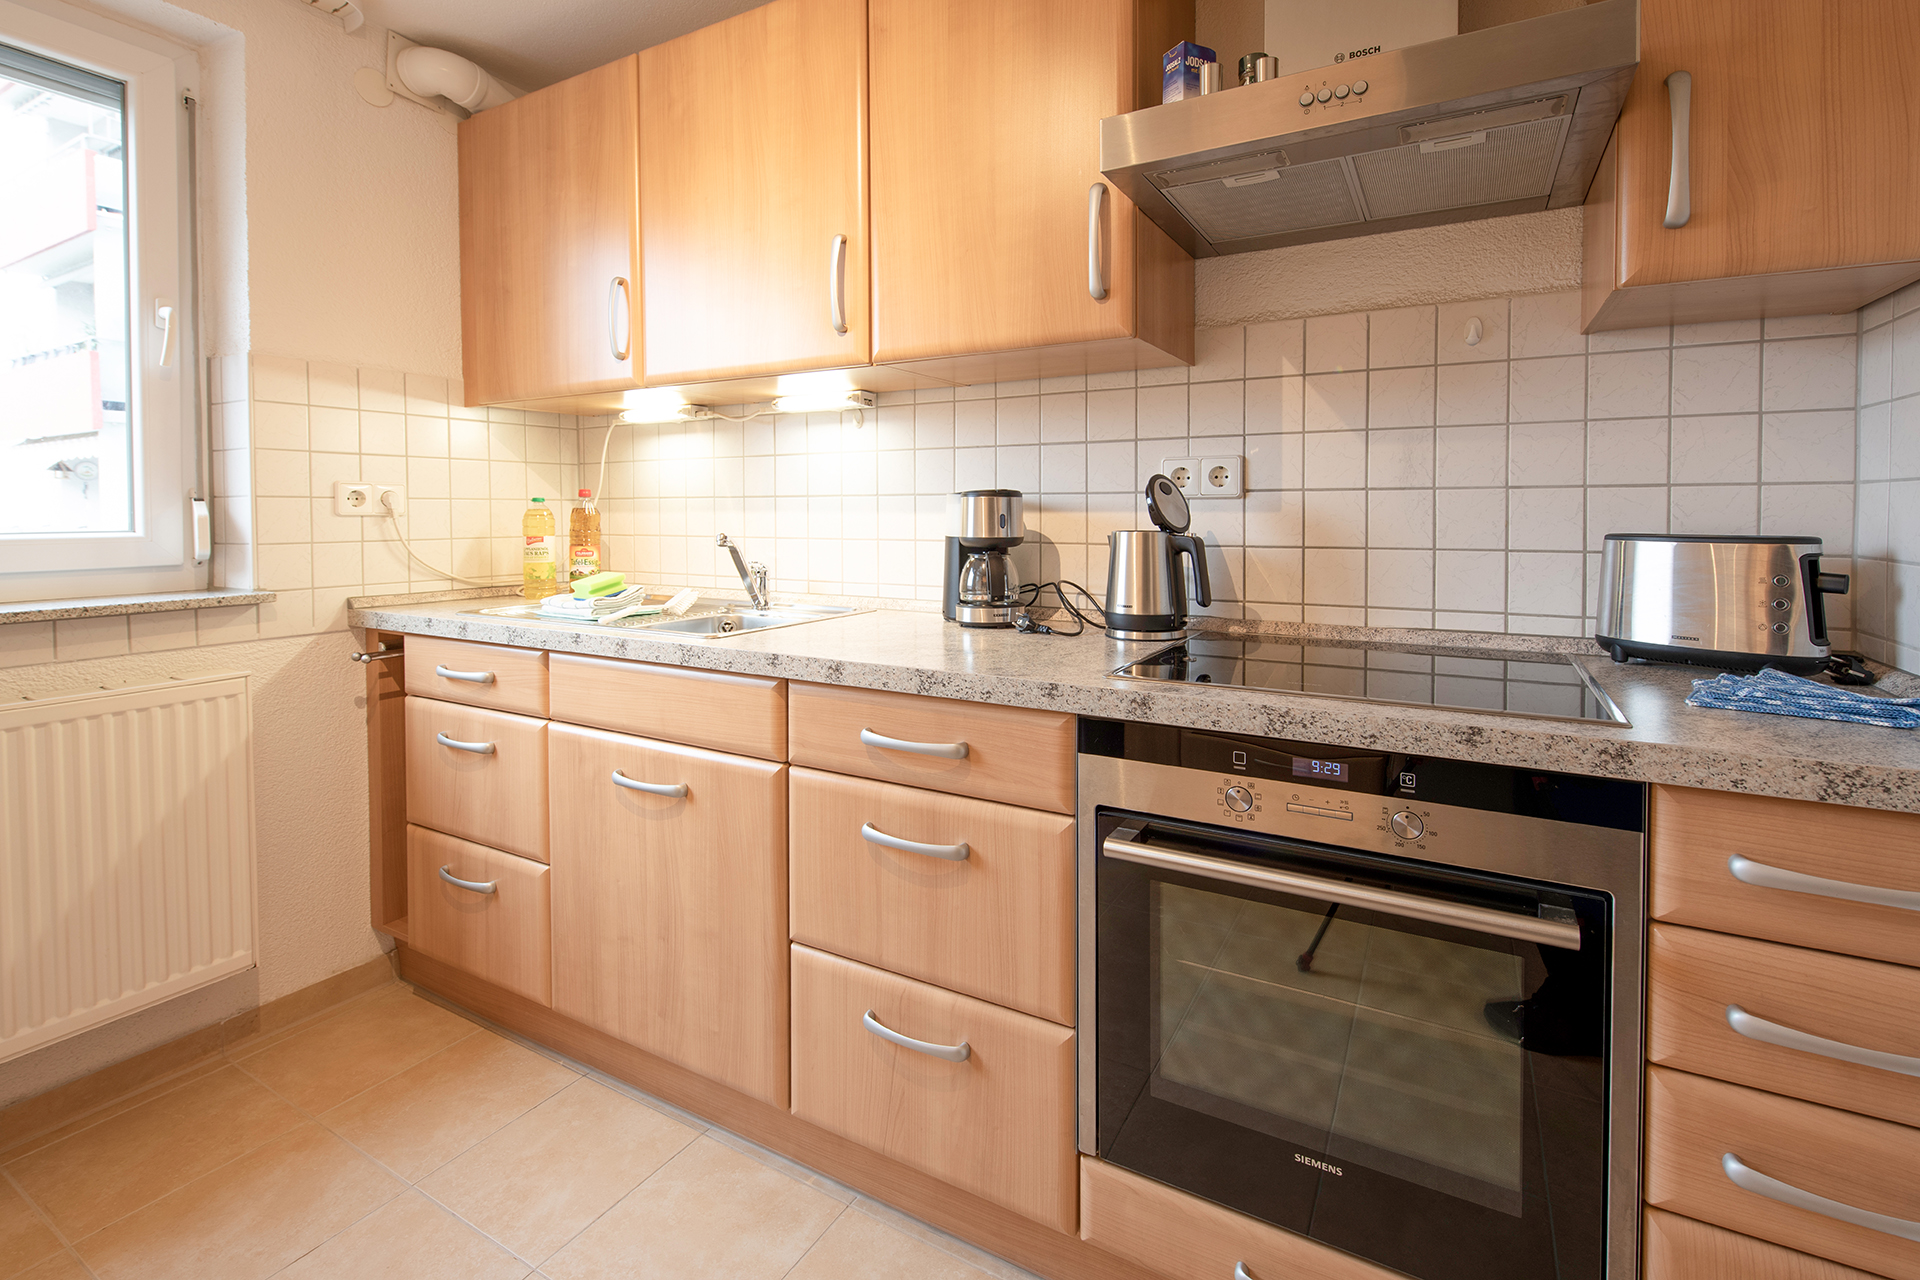 Holiday apartments on Lake Constance: Markdorf 1 - Kitchen